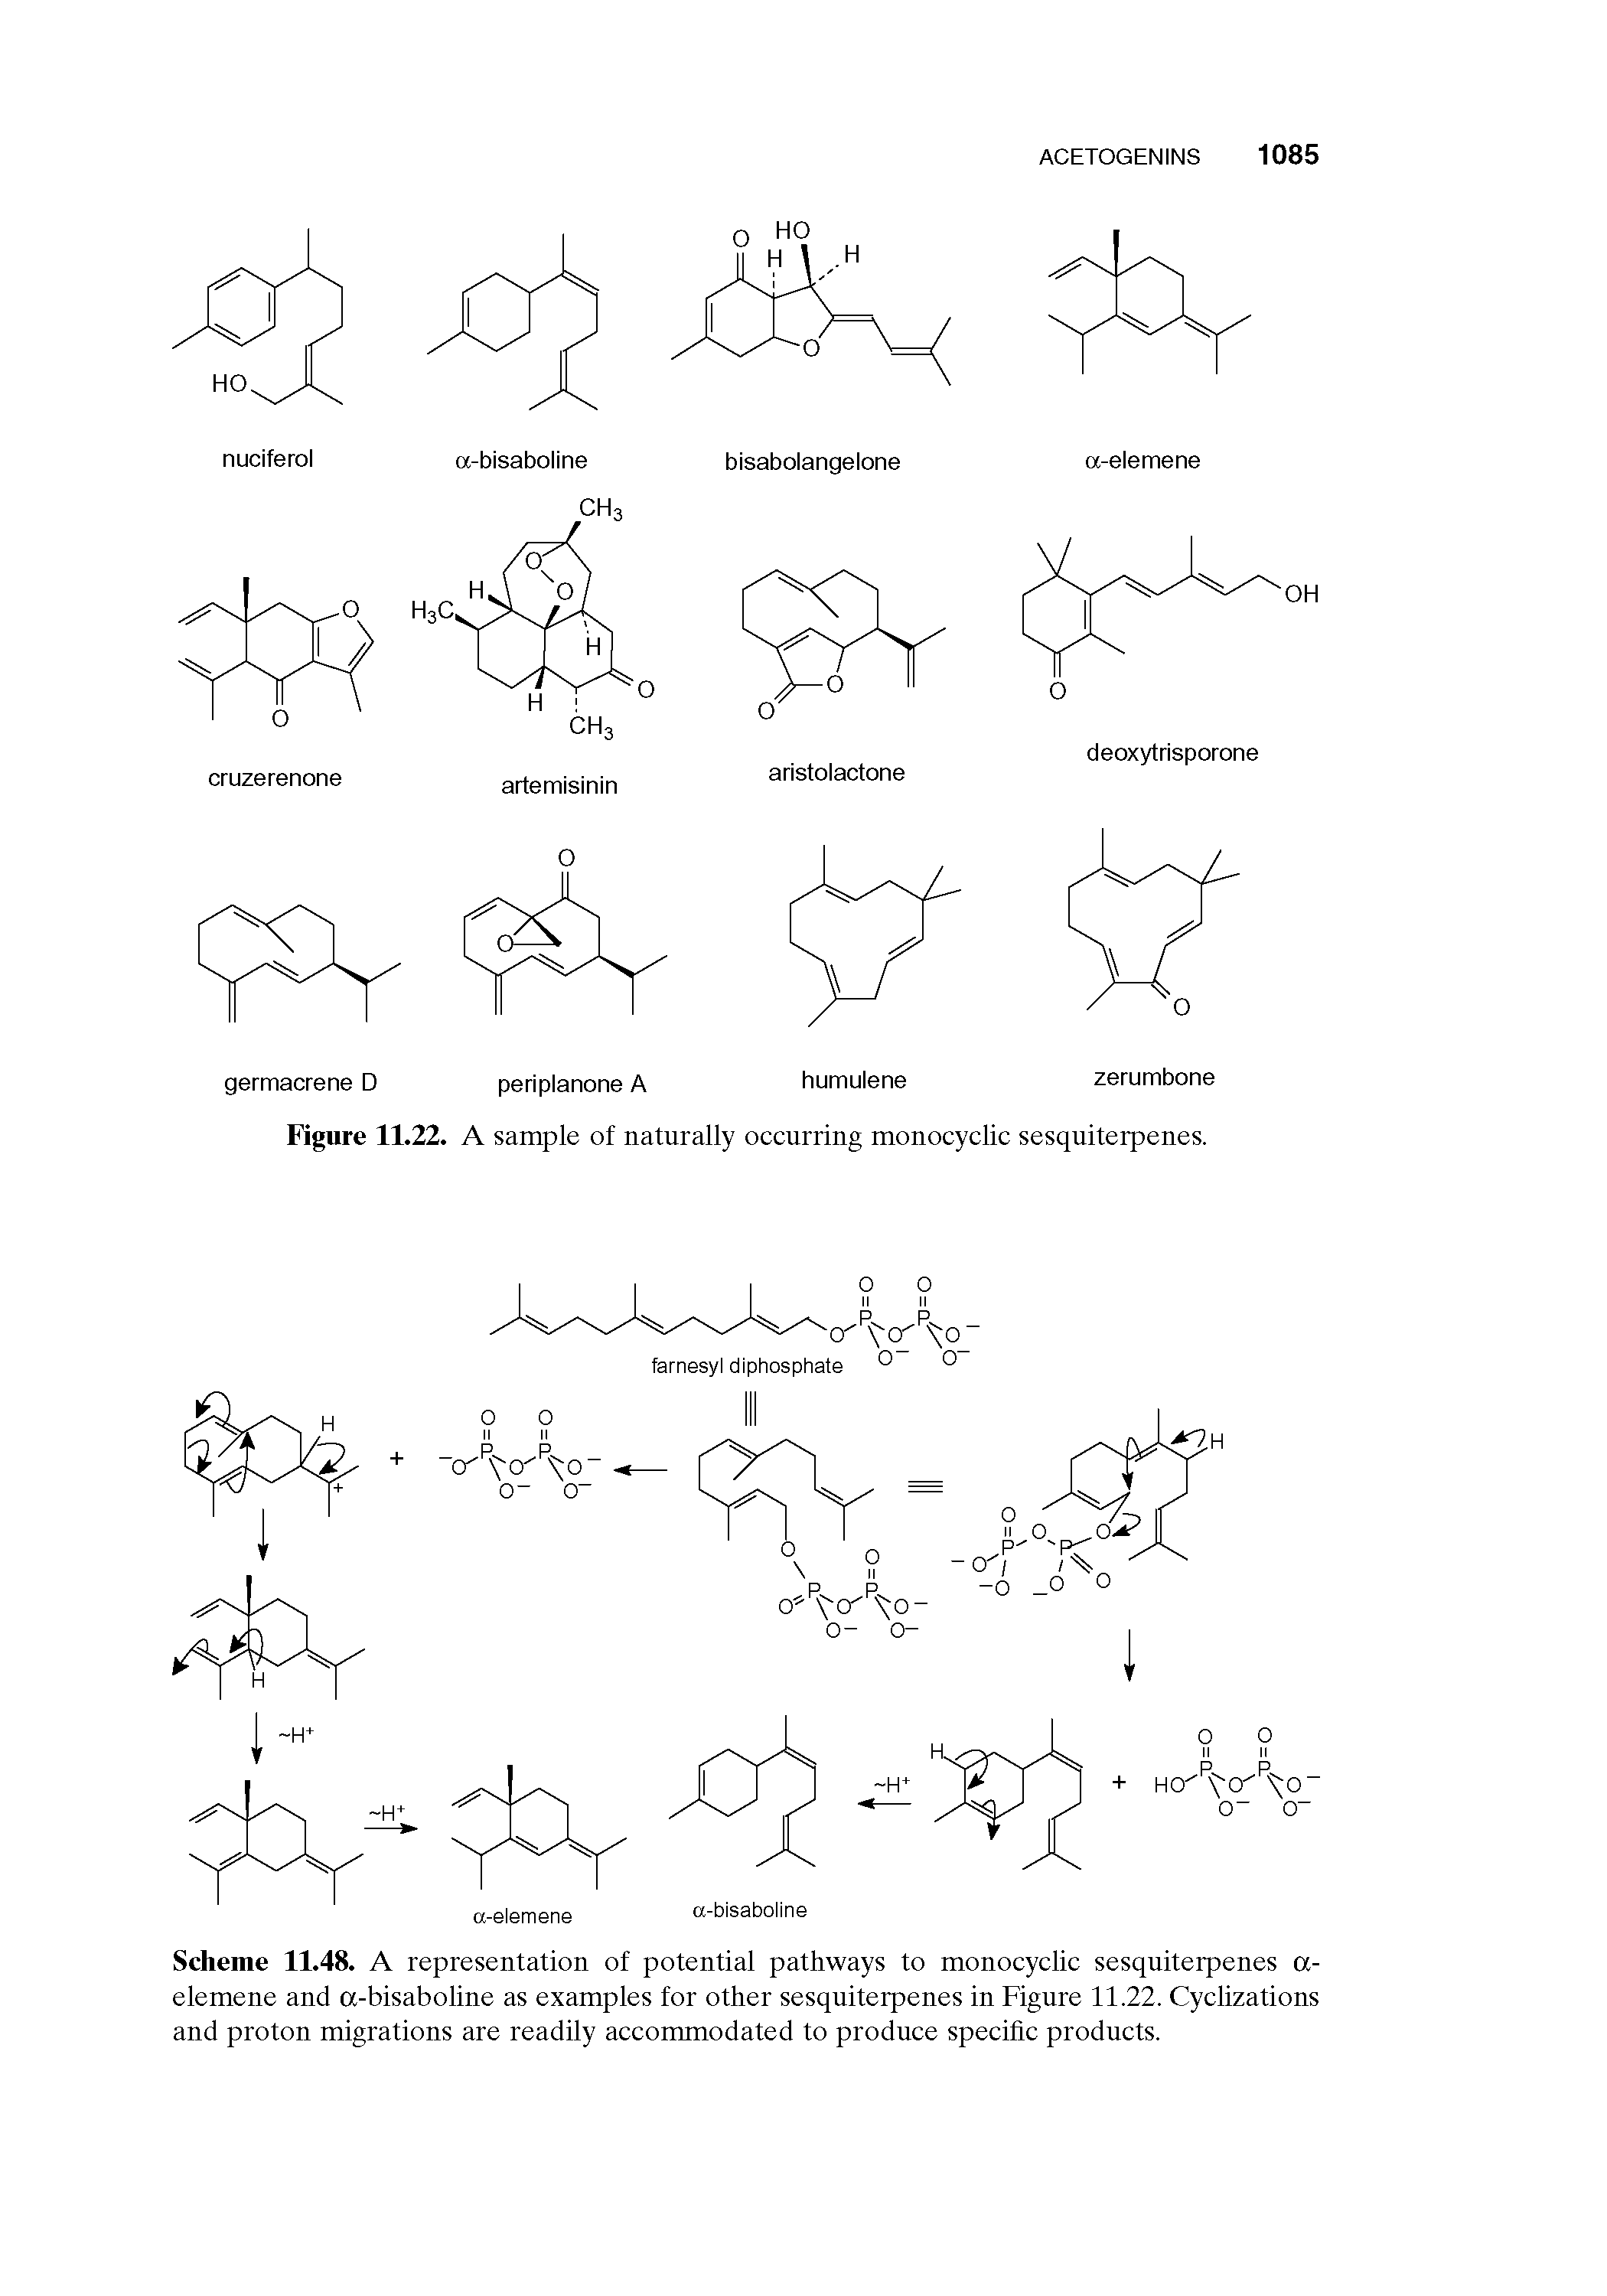 Scheme 11.48. A representation of potential pathways to monocyclic sesquiterpenes a-elemene and a-bisaboline as examples for other sesquiterpenes in Figure 11.22. Cyclizations and proton migrations are readily accommodated to produce specific products.